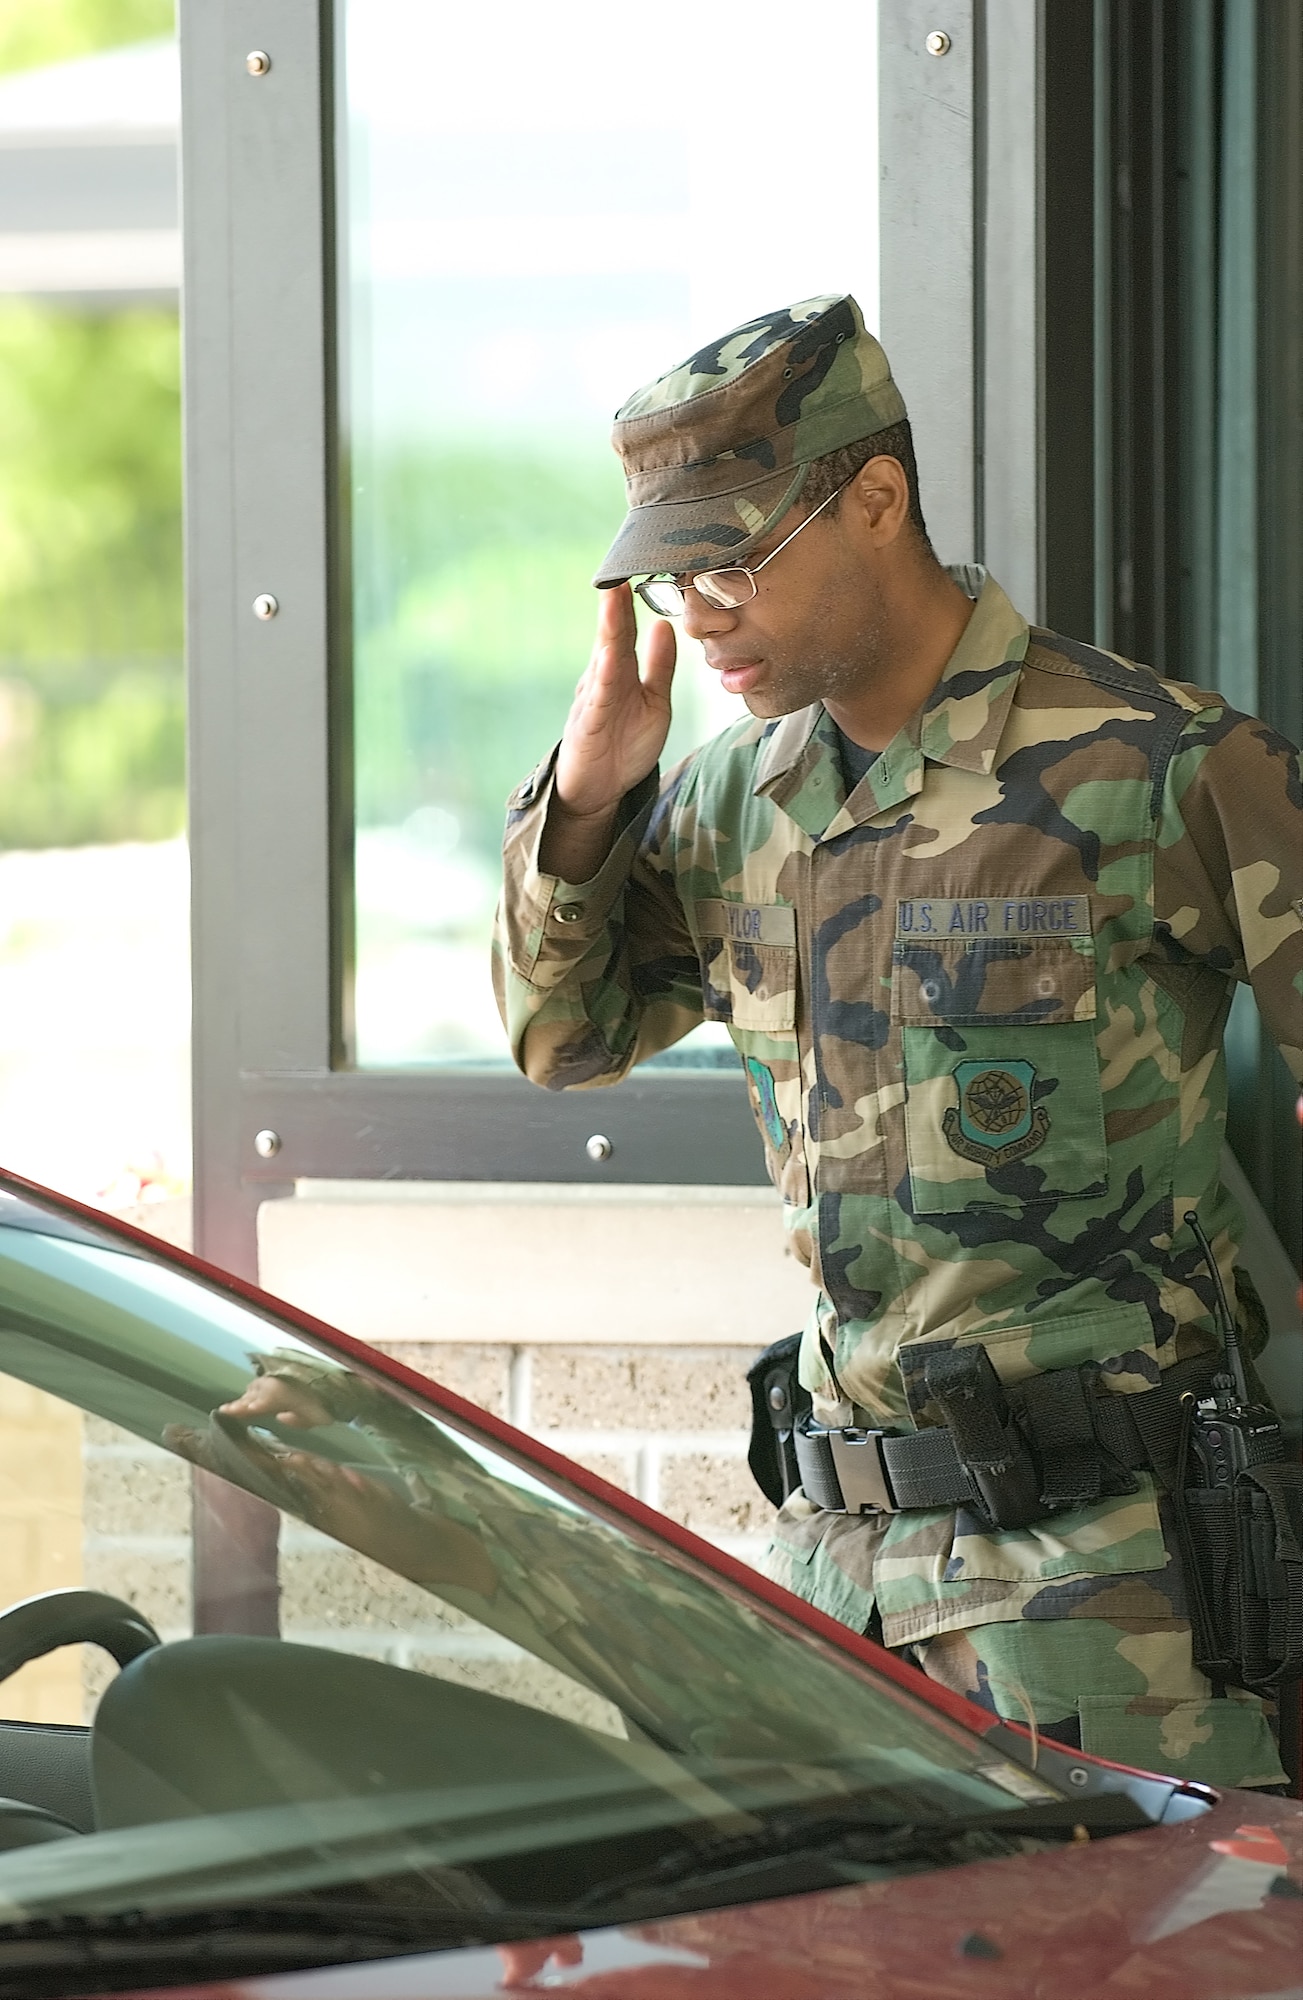 DOVER AIR FORCE BASE, Del. -- Airman 1st Class Jonathan Taylor, 436th Security Forces Squadron augmentee, salutes an officer as he passes through Dover's Main Gate Monday. Airman Taylor is an Air National Guard member on orders to Dover. (U.S. Air Force photo/Jason Minto)